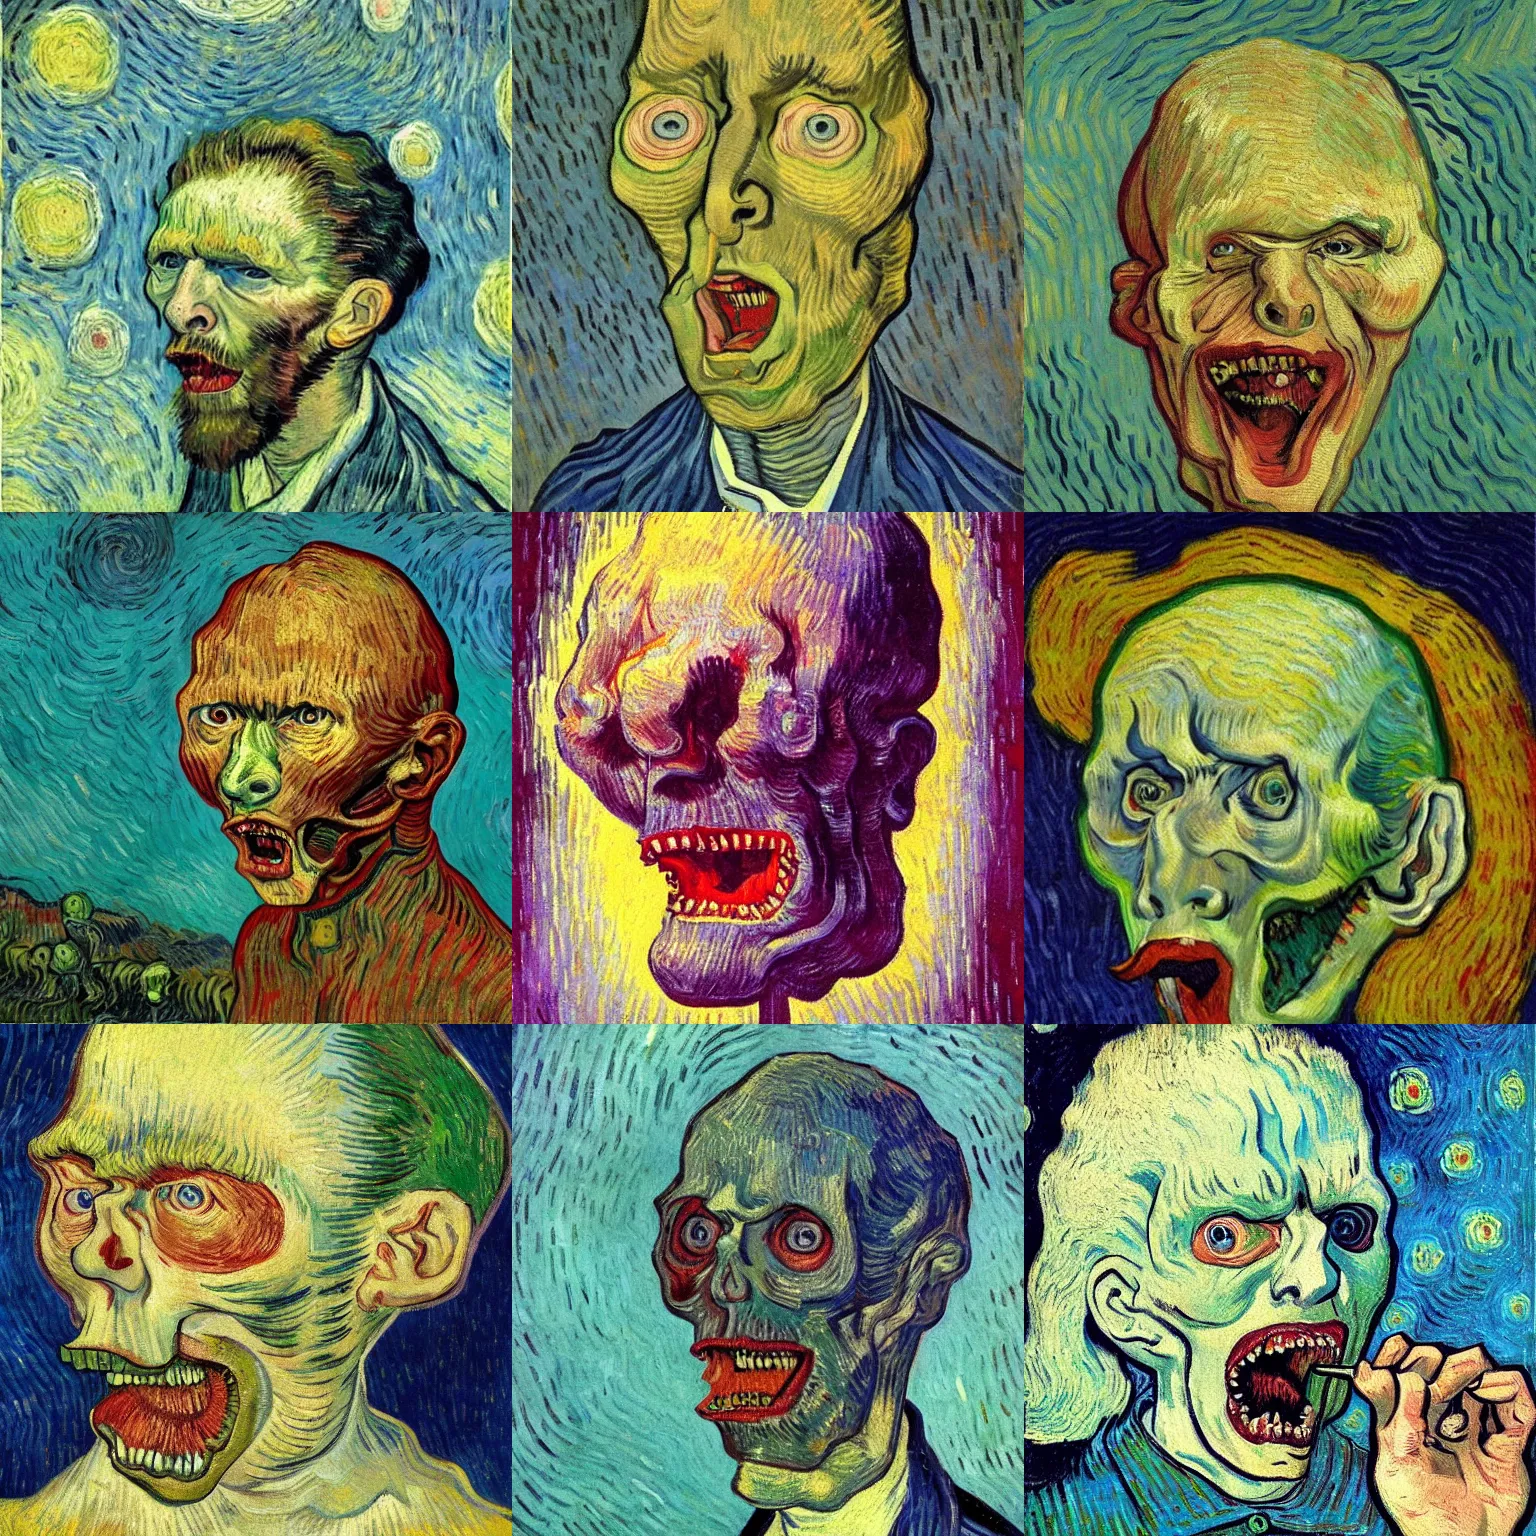 Prompt: A disembodied head screaming with its brain exposed, oil painting, surrealism style, painted by Vincent van Gogh